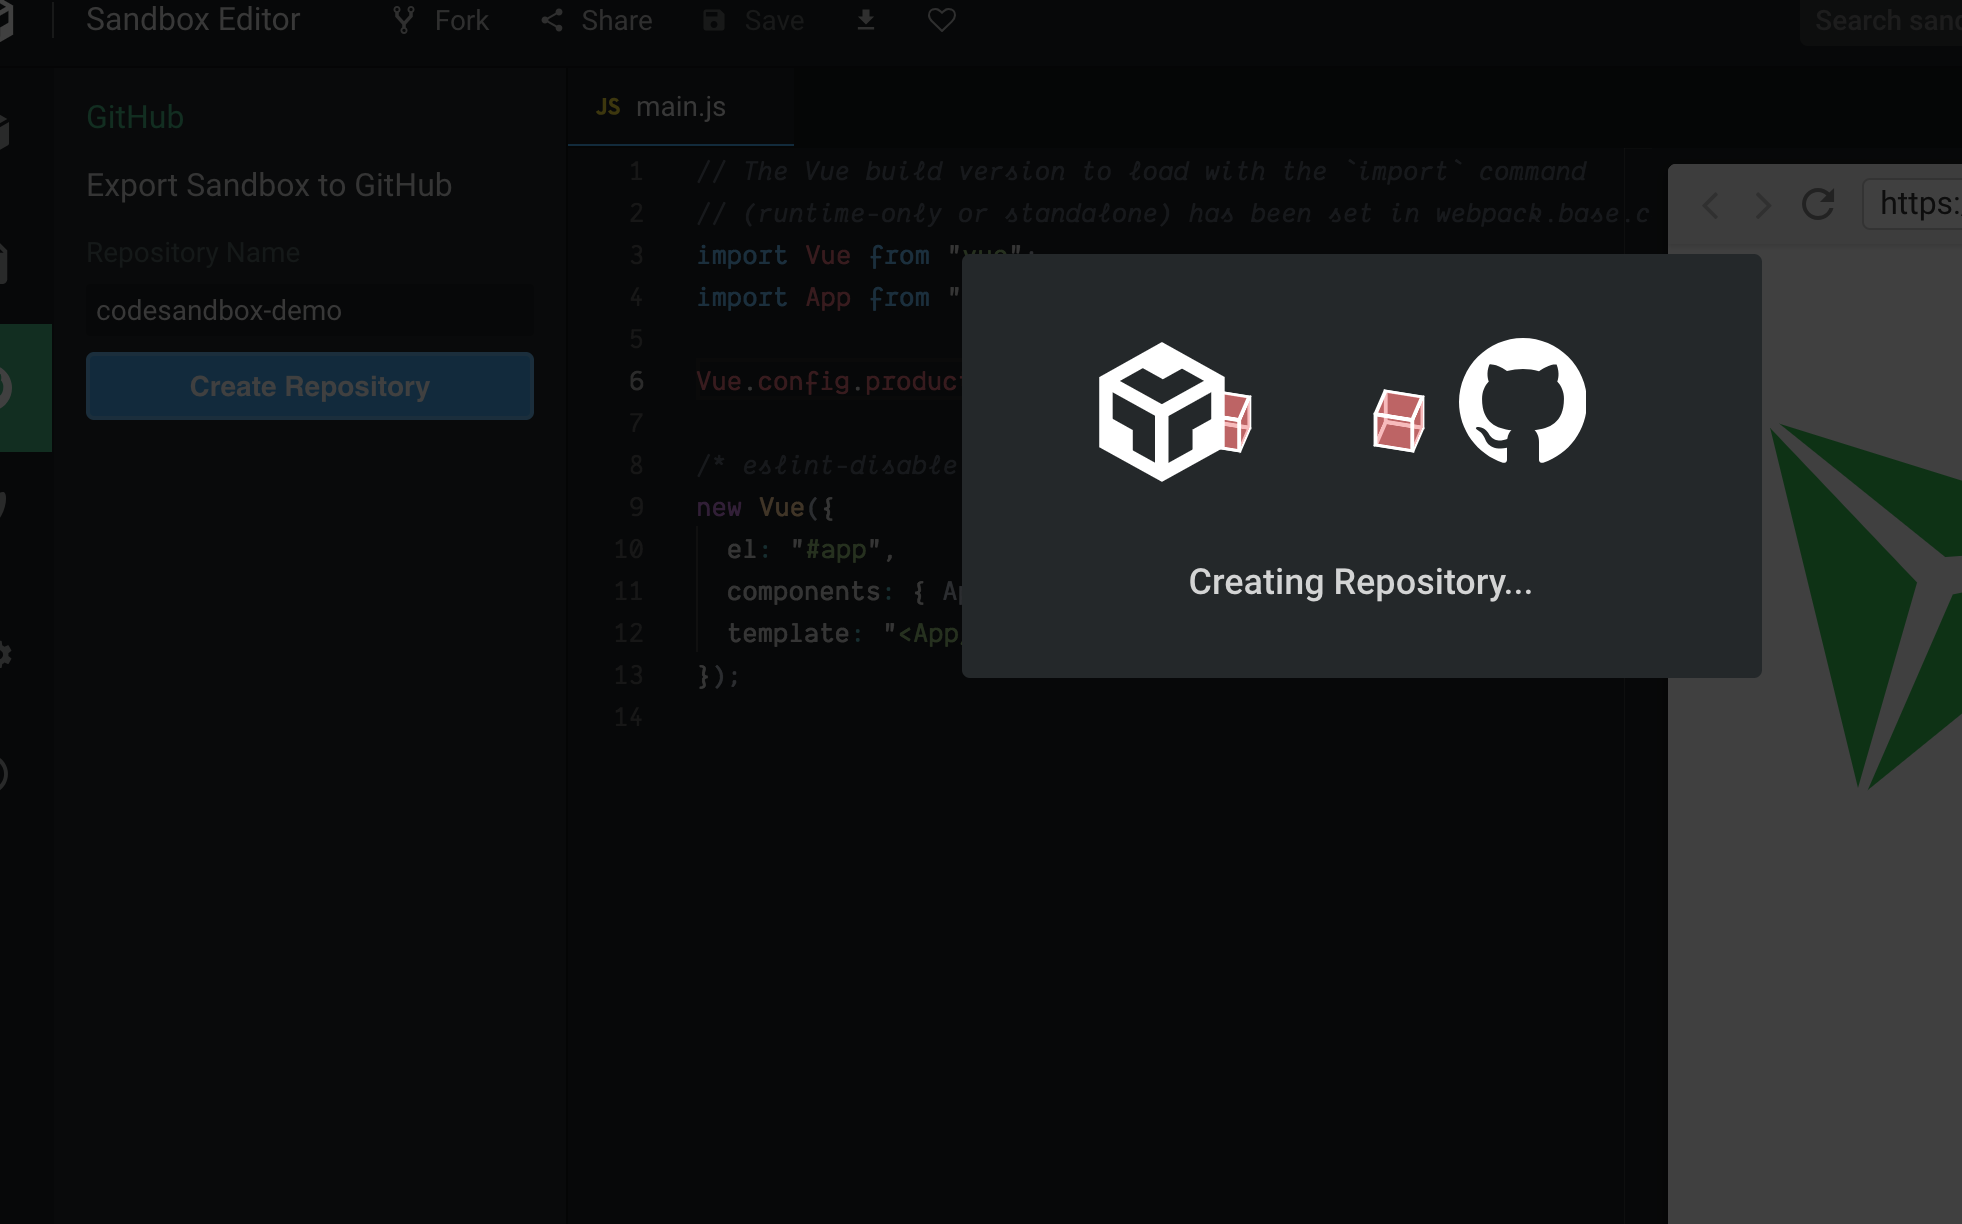 Screenshot showing the creating of a Github repository from within Codesandbox